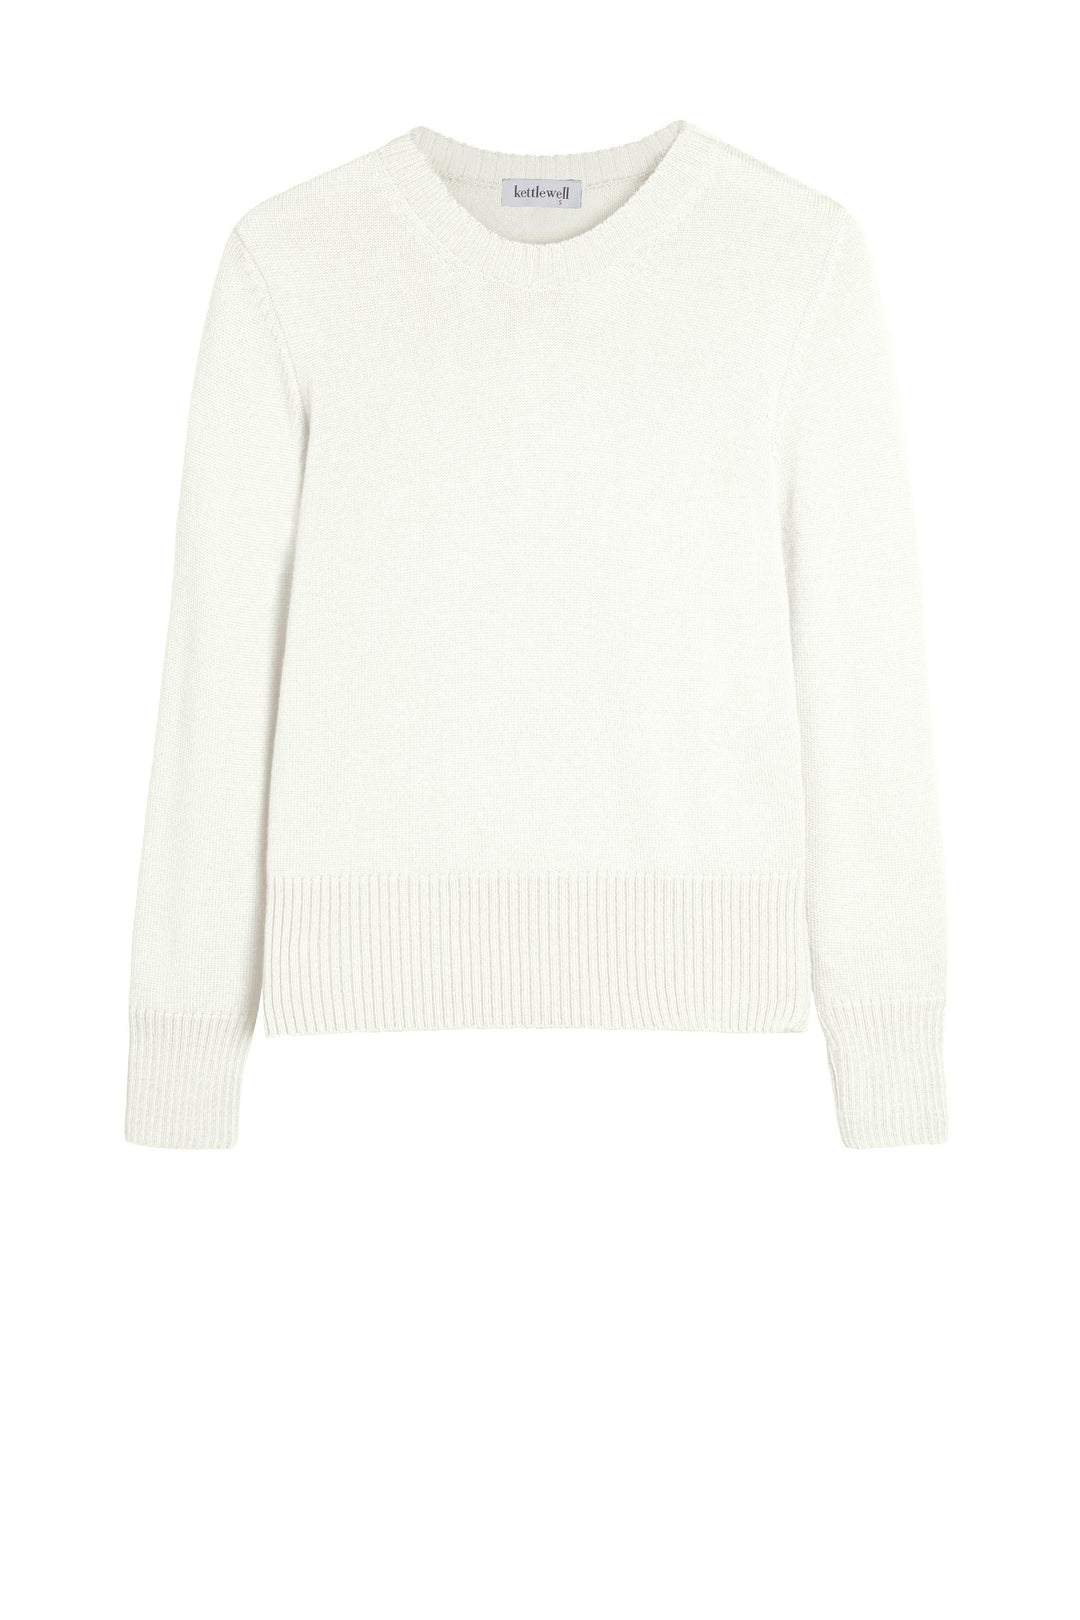 Kettlewell Connie Sweater - Ivory